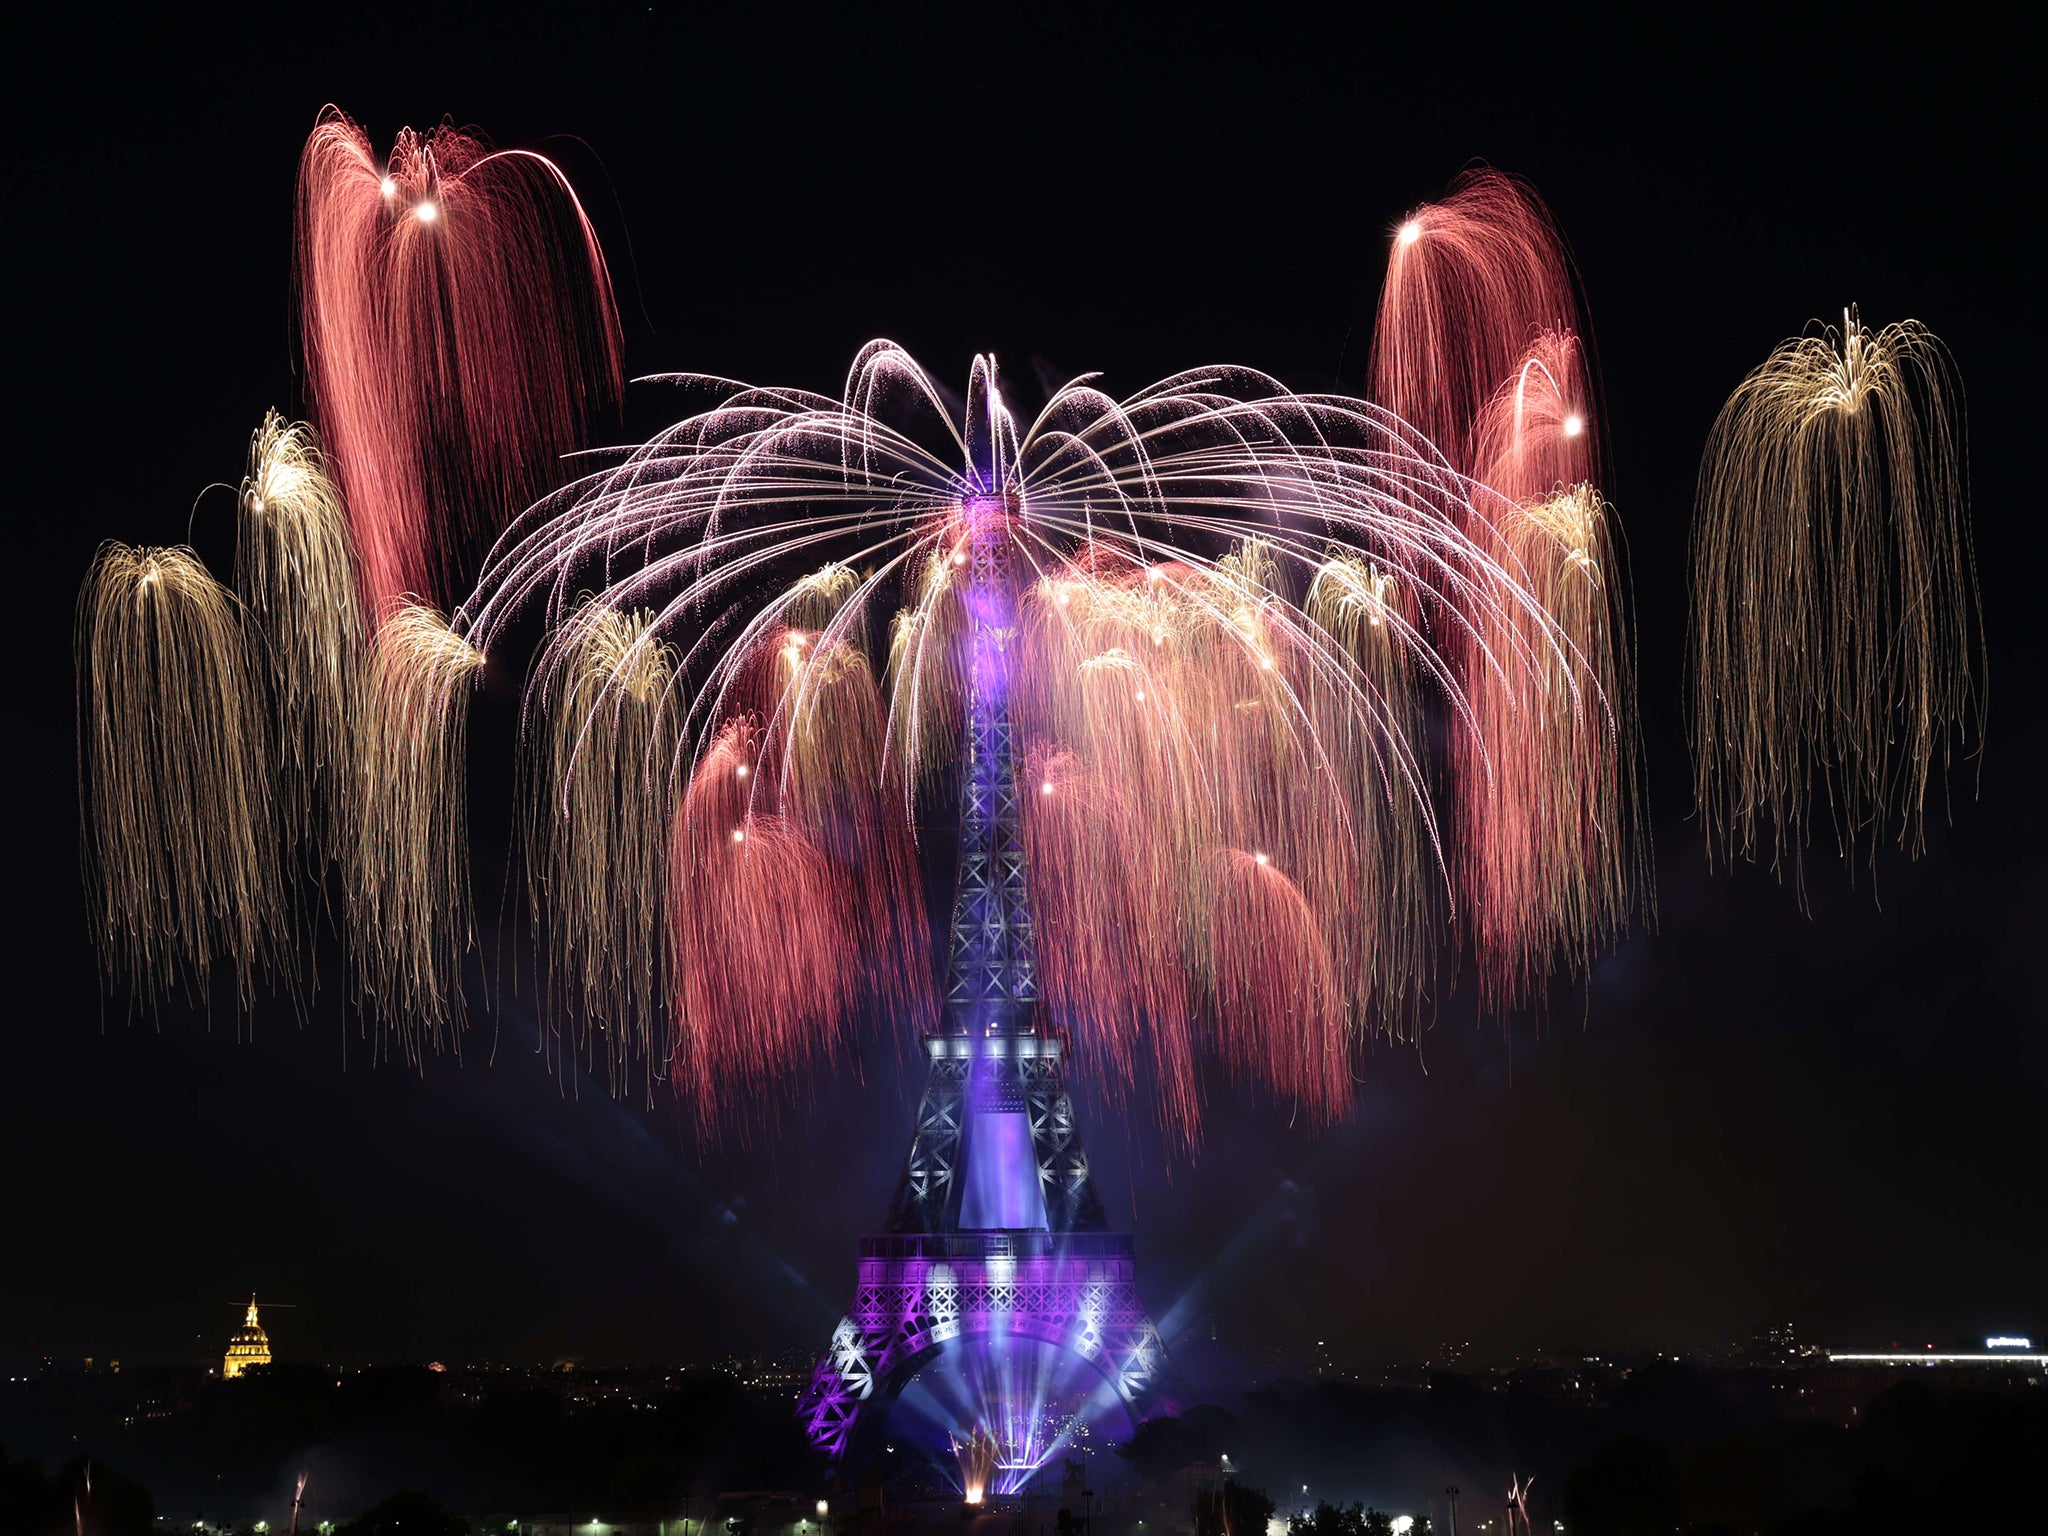 Colourful fireworks light skies above the Eiffel Tower